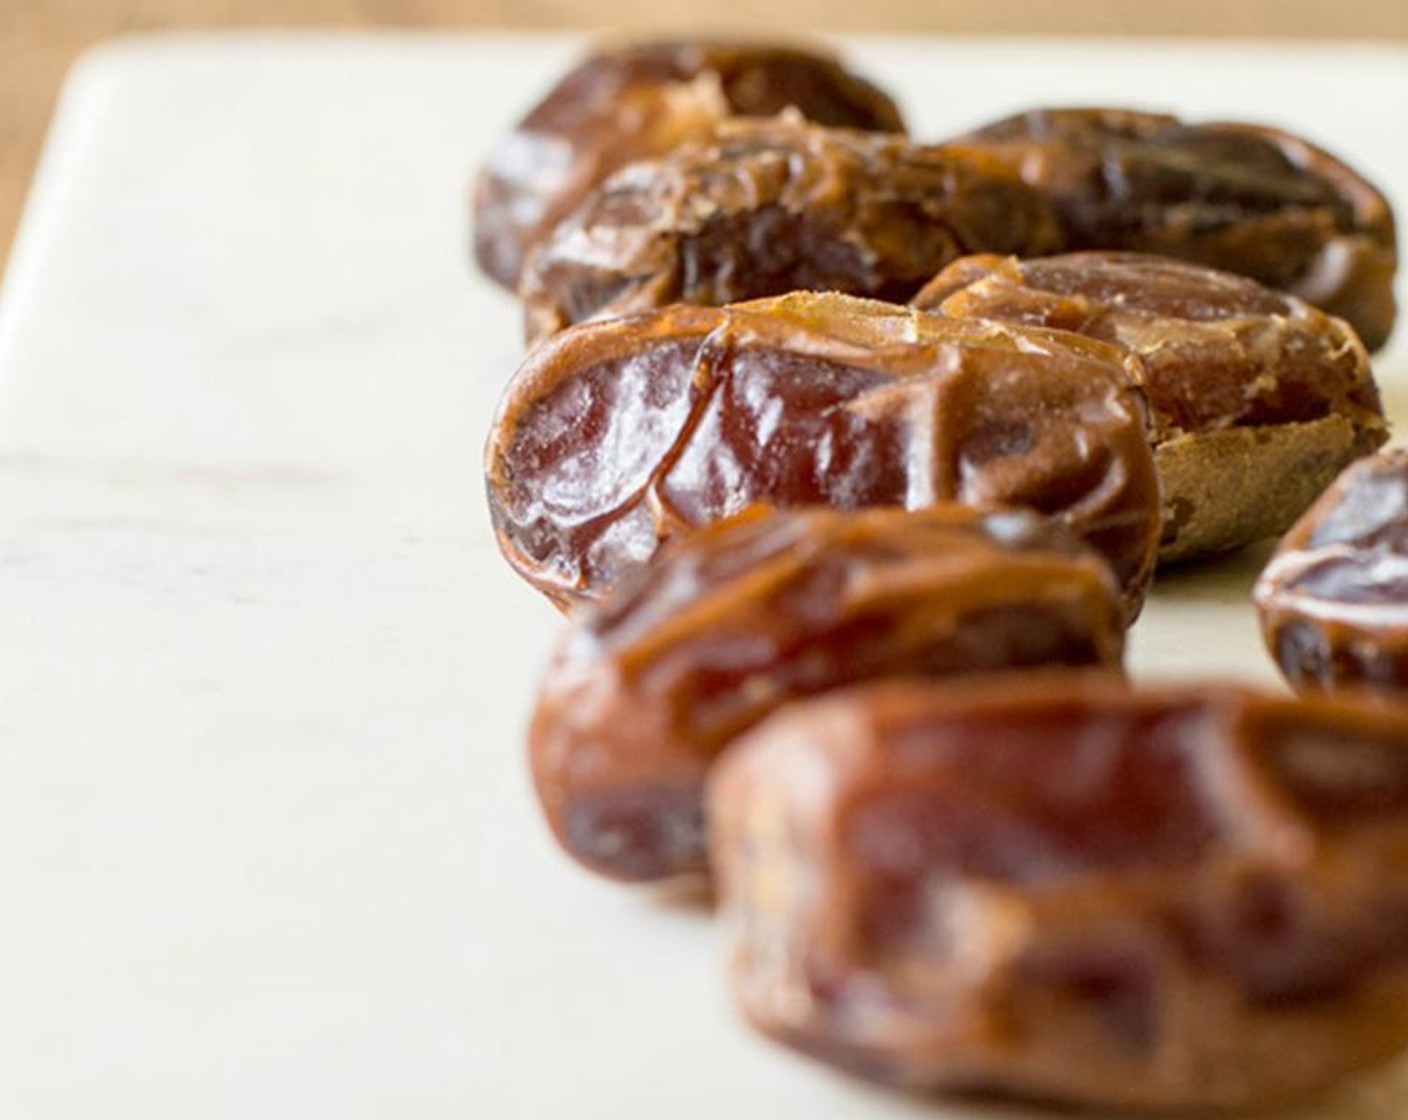 step 1 Add Peanut Butter (3/4 cup) and Dates (8) to a high-powered blender or food processor and process until smooth.